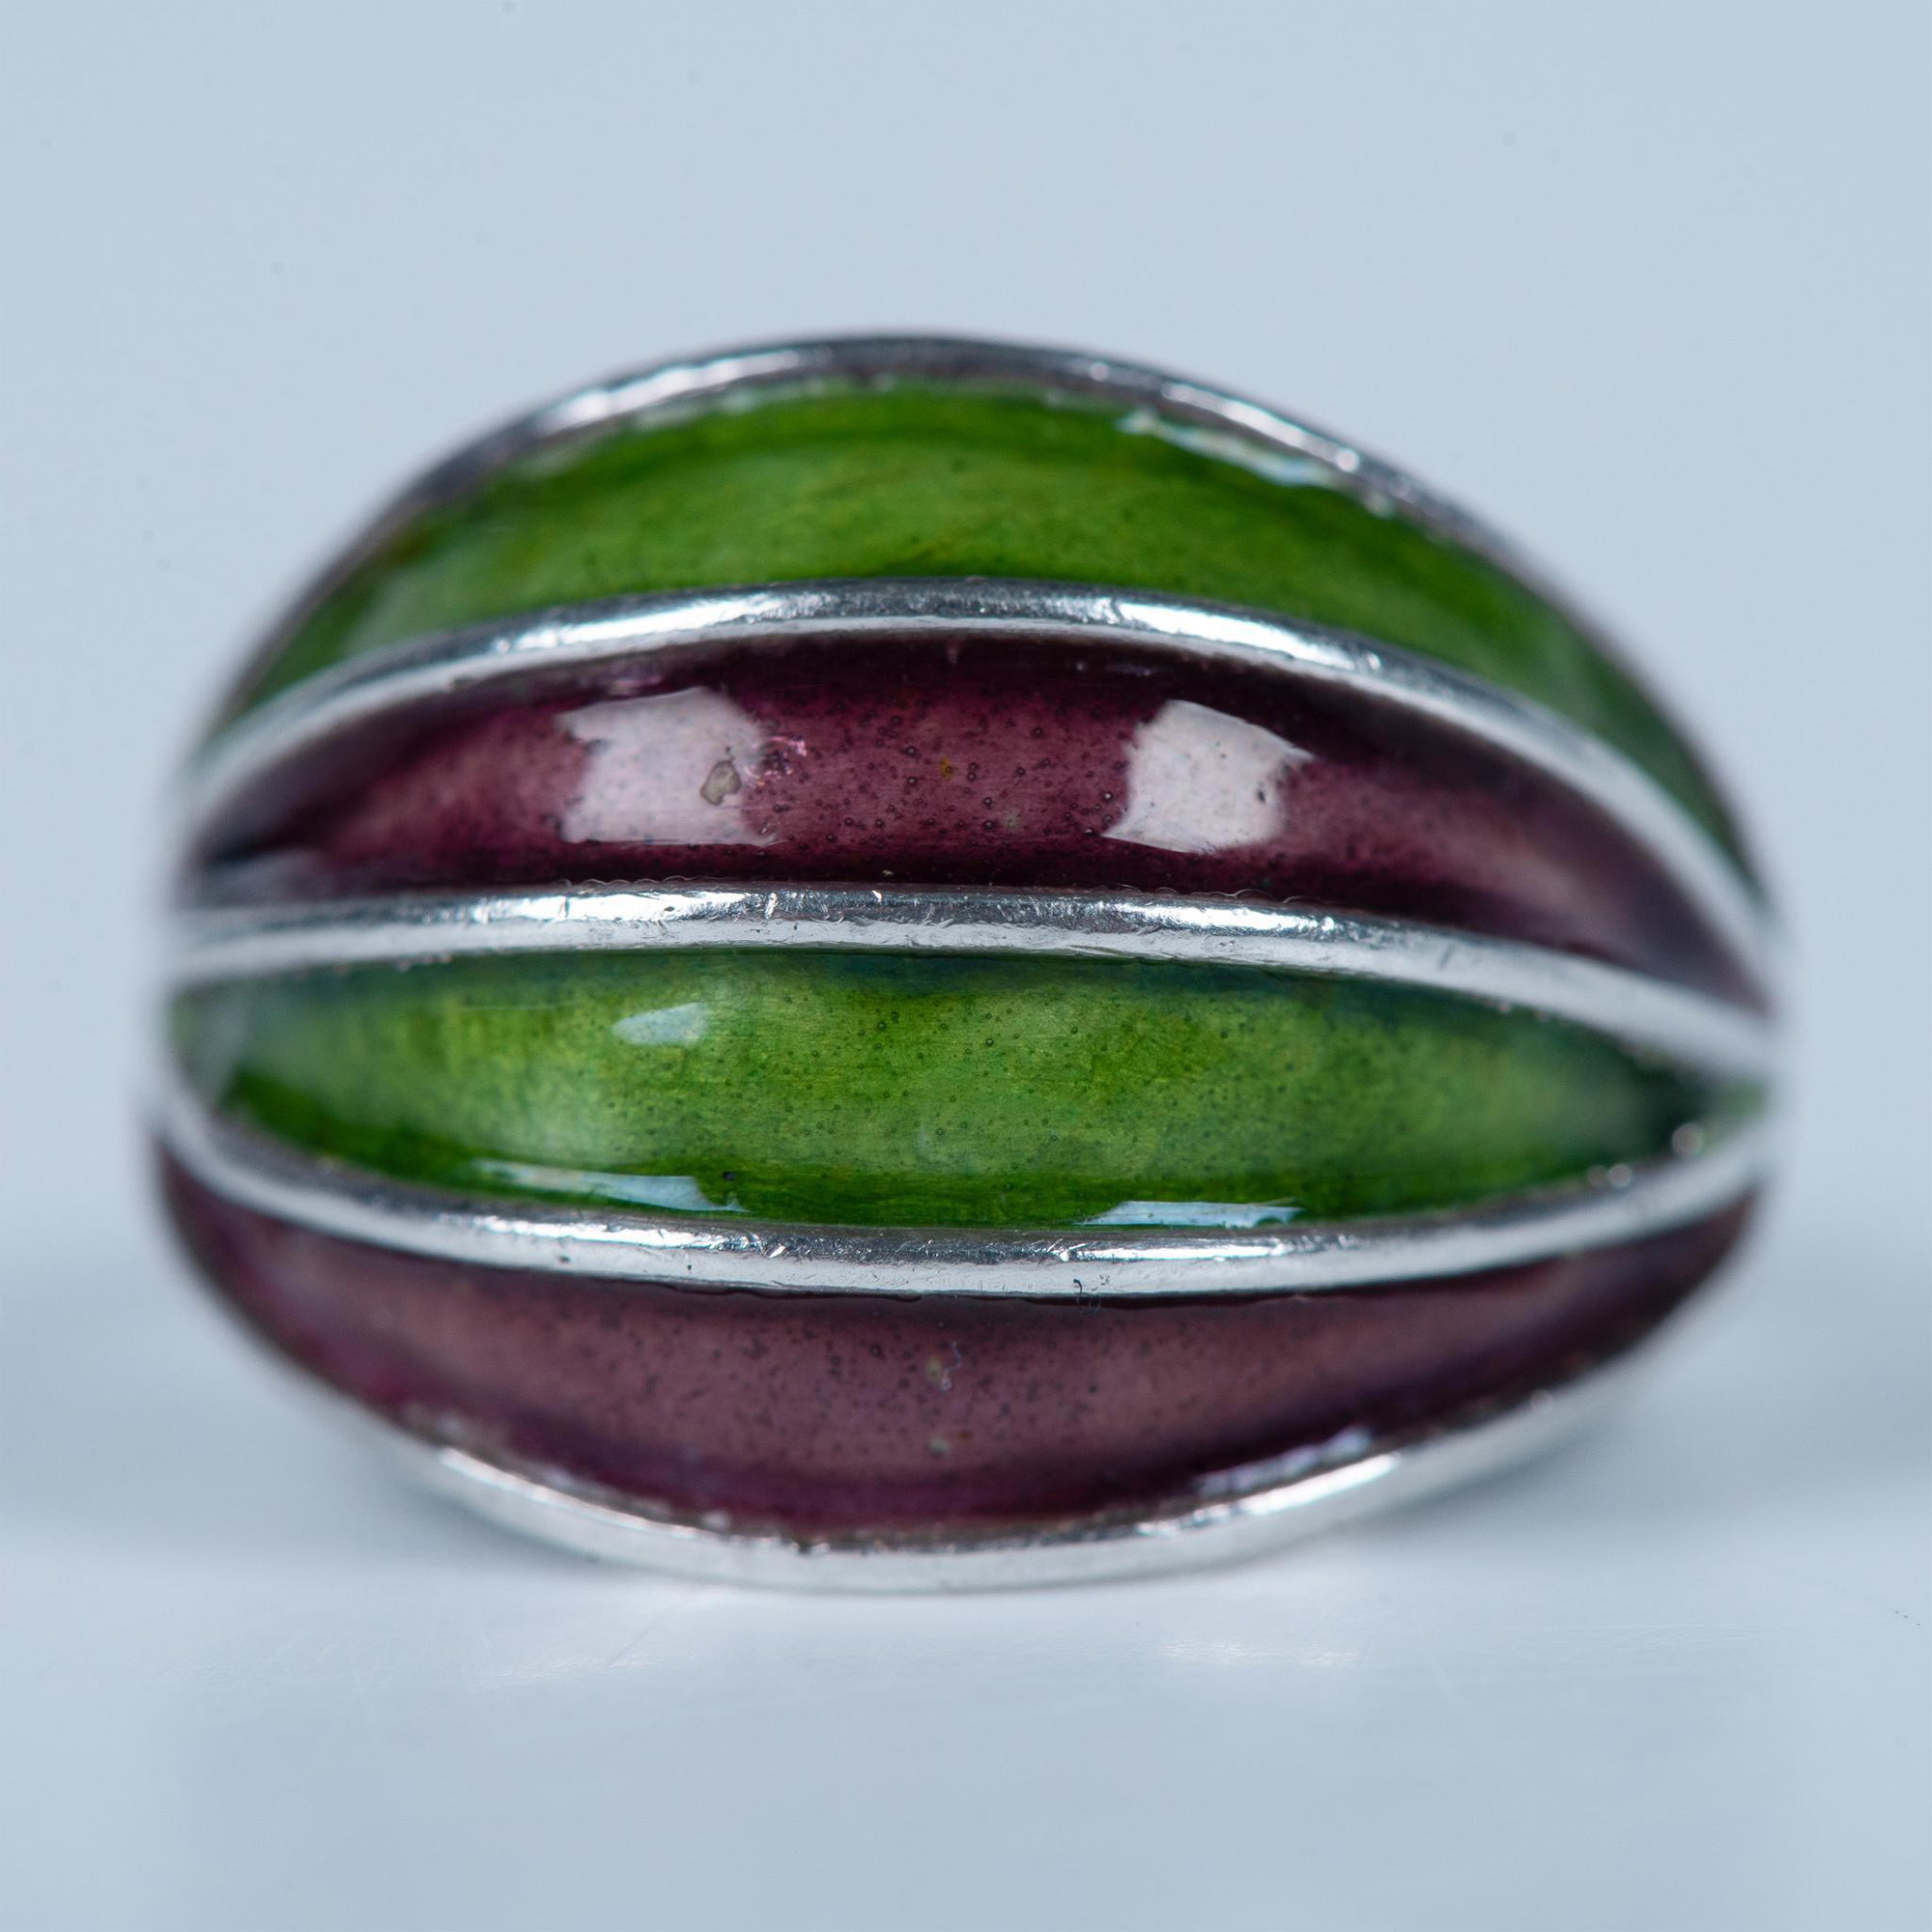 Vintage Sterling Silver Dome Ring with Green & Purple Enamel - Image 6 of 6